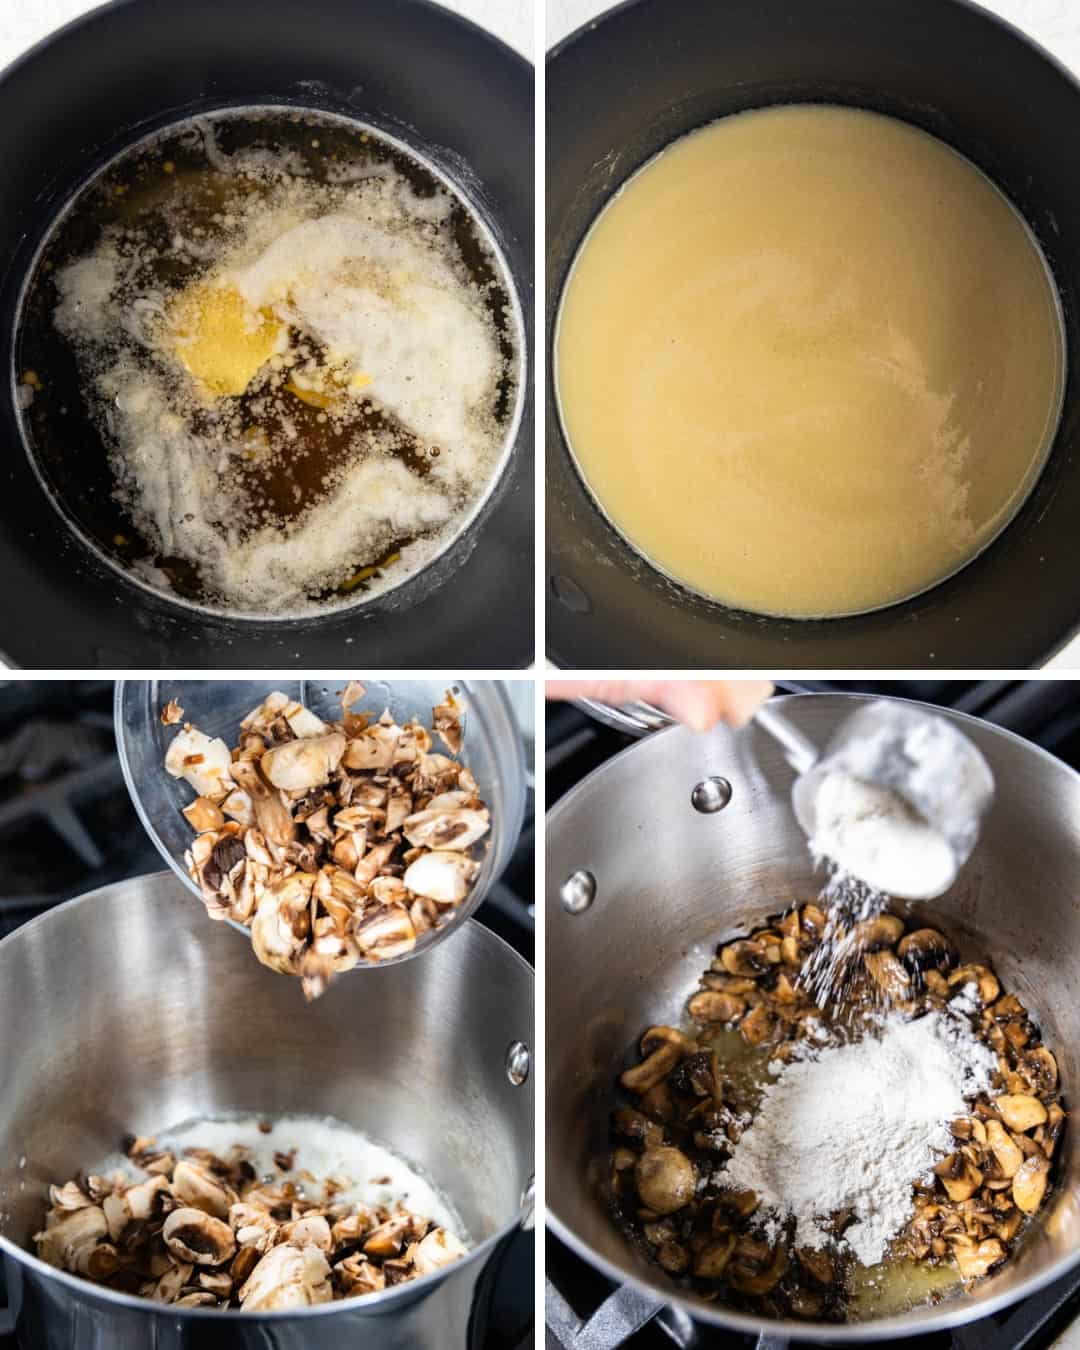 A collage of images showing the first four stages of making homemade cream of mushroom soup.